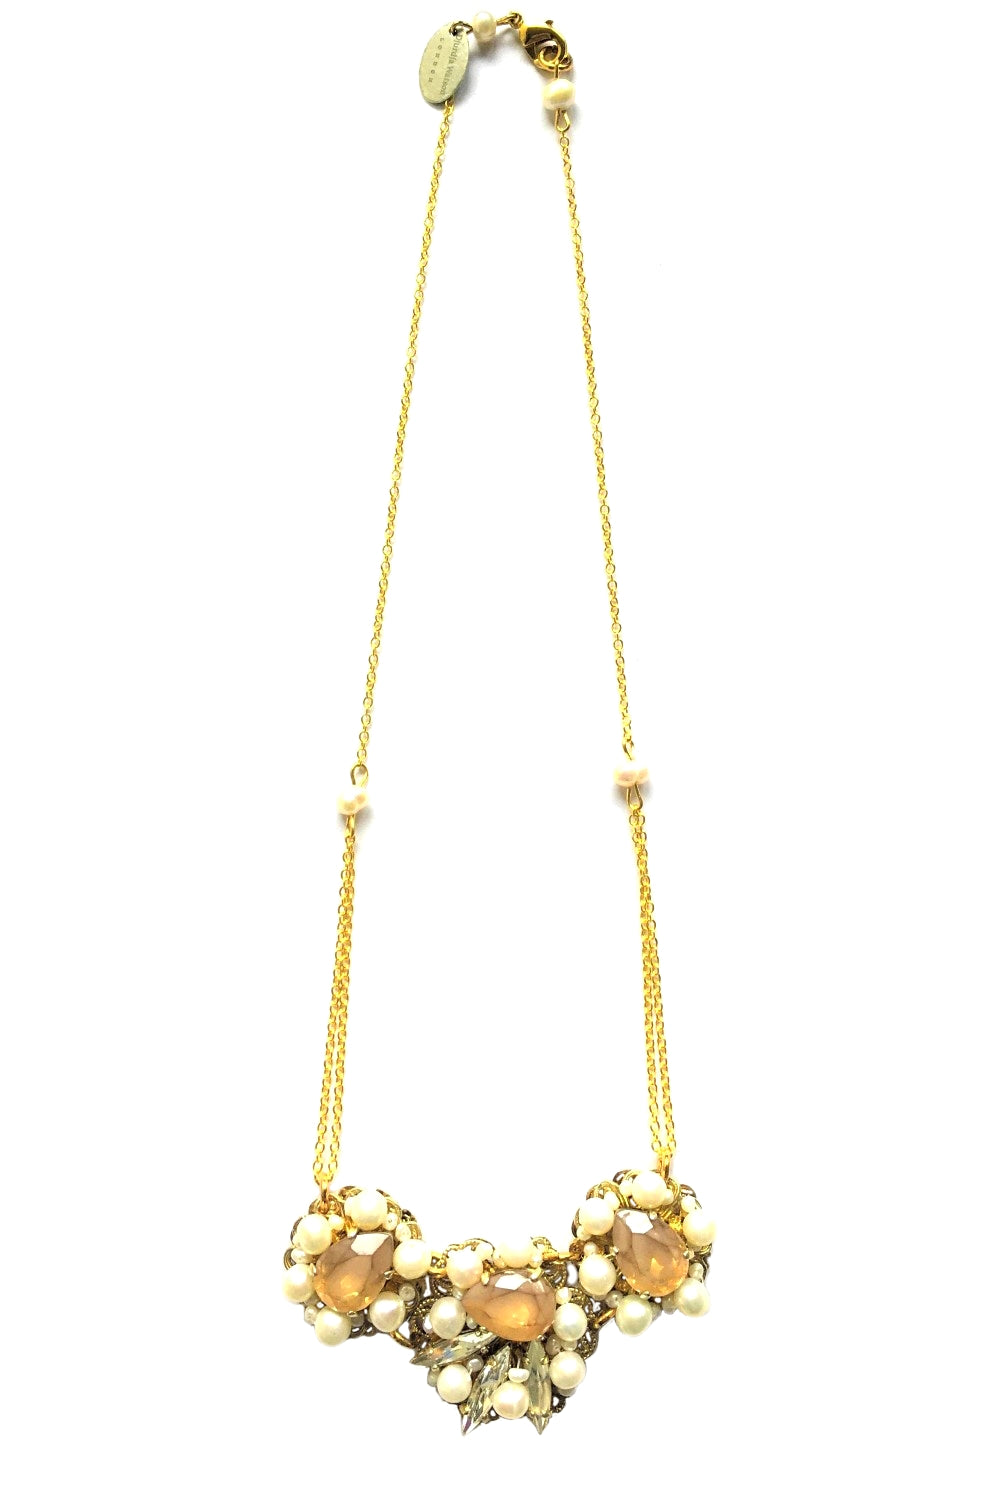 Gold Champange Pearls and Swarovski Crystals Necklace